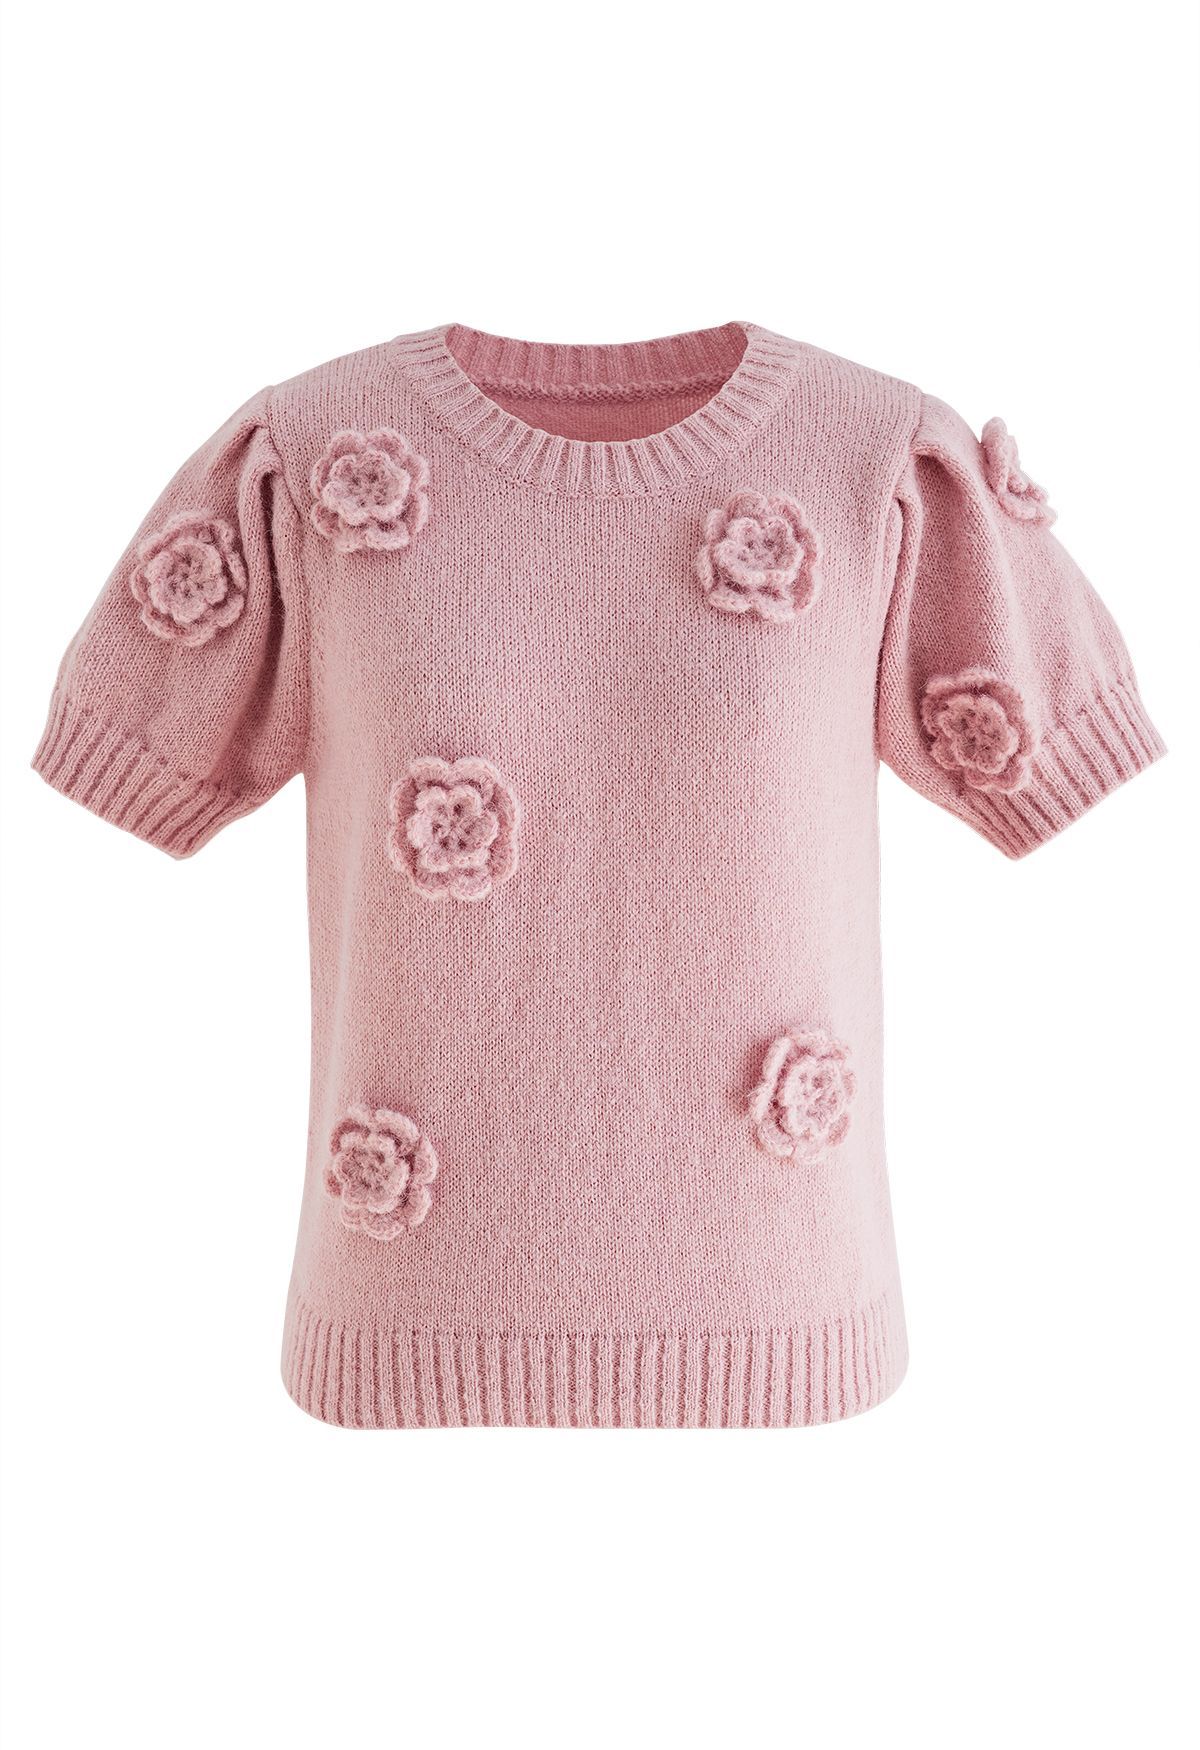 Crochet Flowers Trim Knit Top in Pink | Chicwish